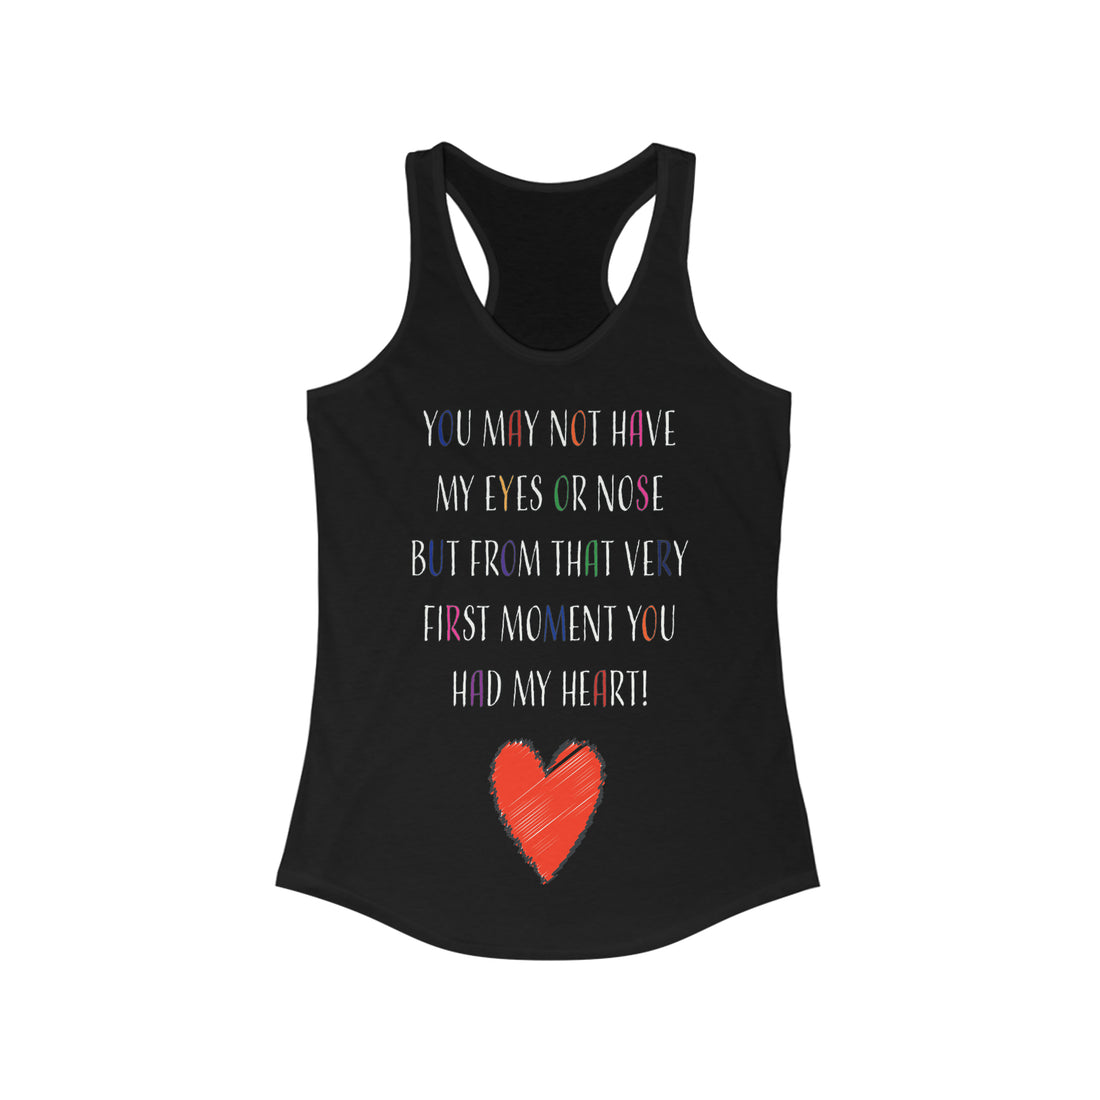 You May Not Have My Eyes Or Nose But From That Very First Moment You Had My HEART - Racerback Tank